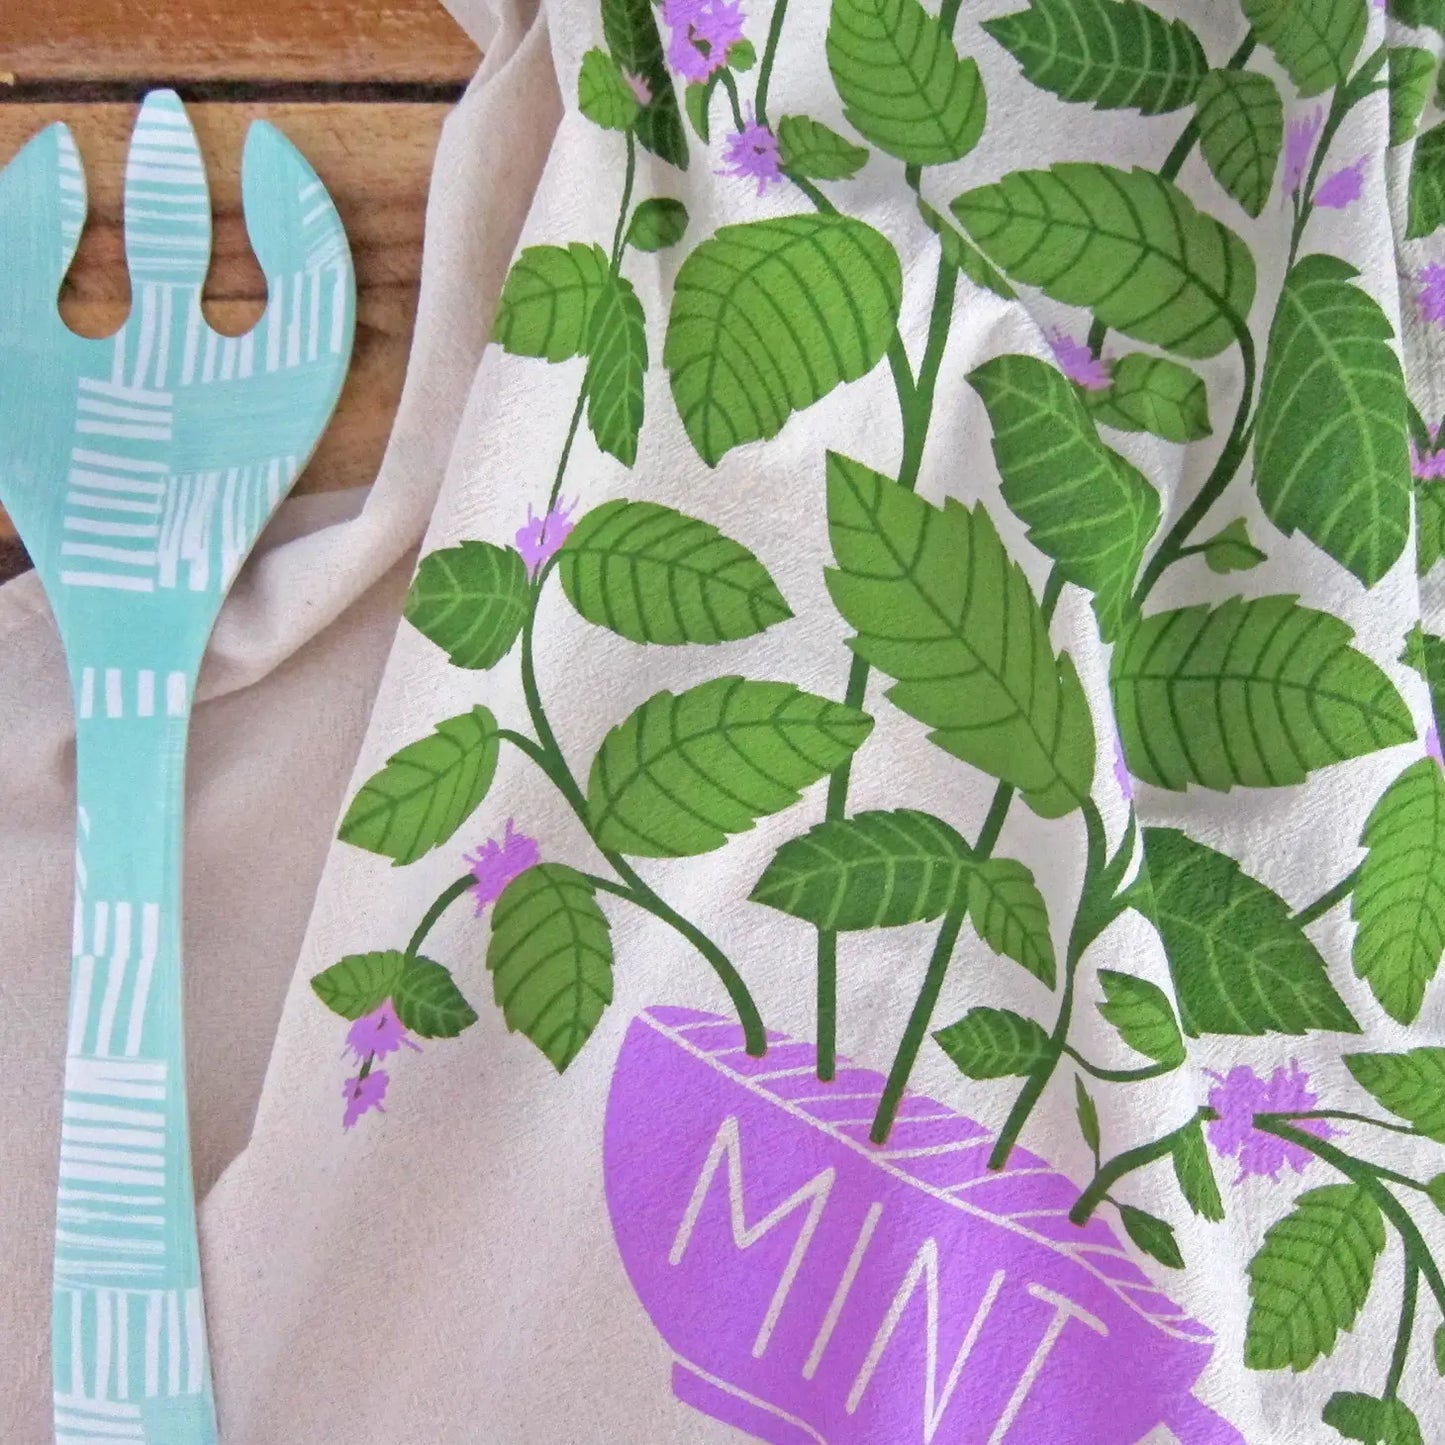 Our mint herb towel will freshen up your kitchen and brighten your everyday. You are mint to have this in your life.  Made from 100% flour sack cotton, our Mint dish towel and will only get softer and more absorbent over the years in your kitchen. This generously sized dish towel can handle small and big tasks in the kitchen as well as household chores.